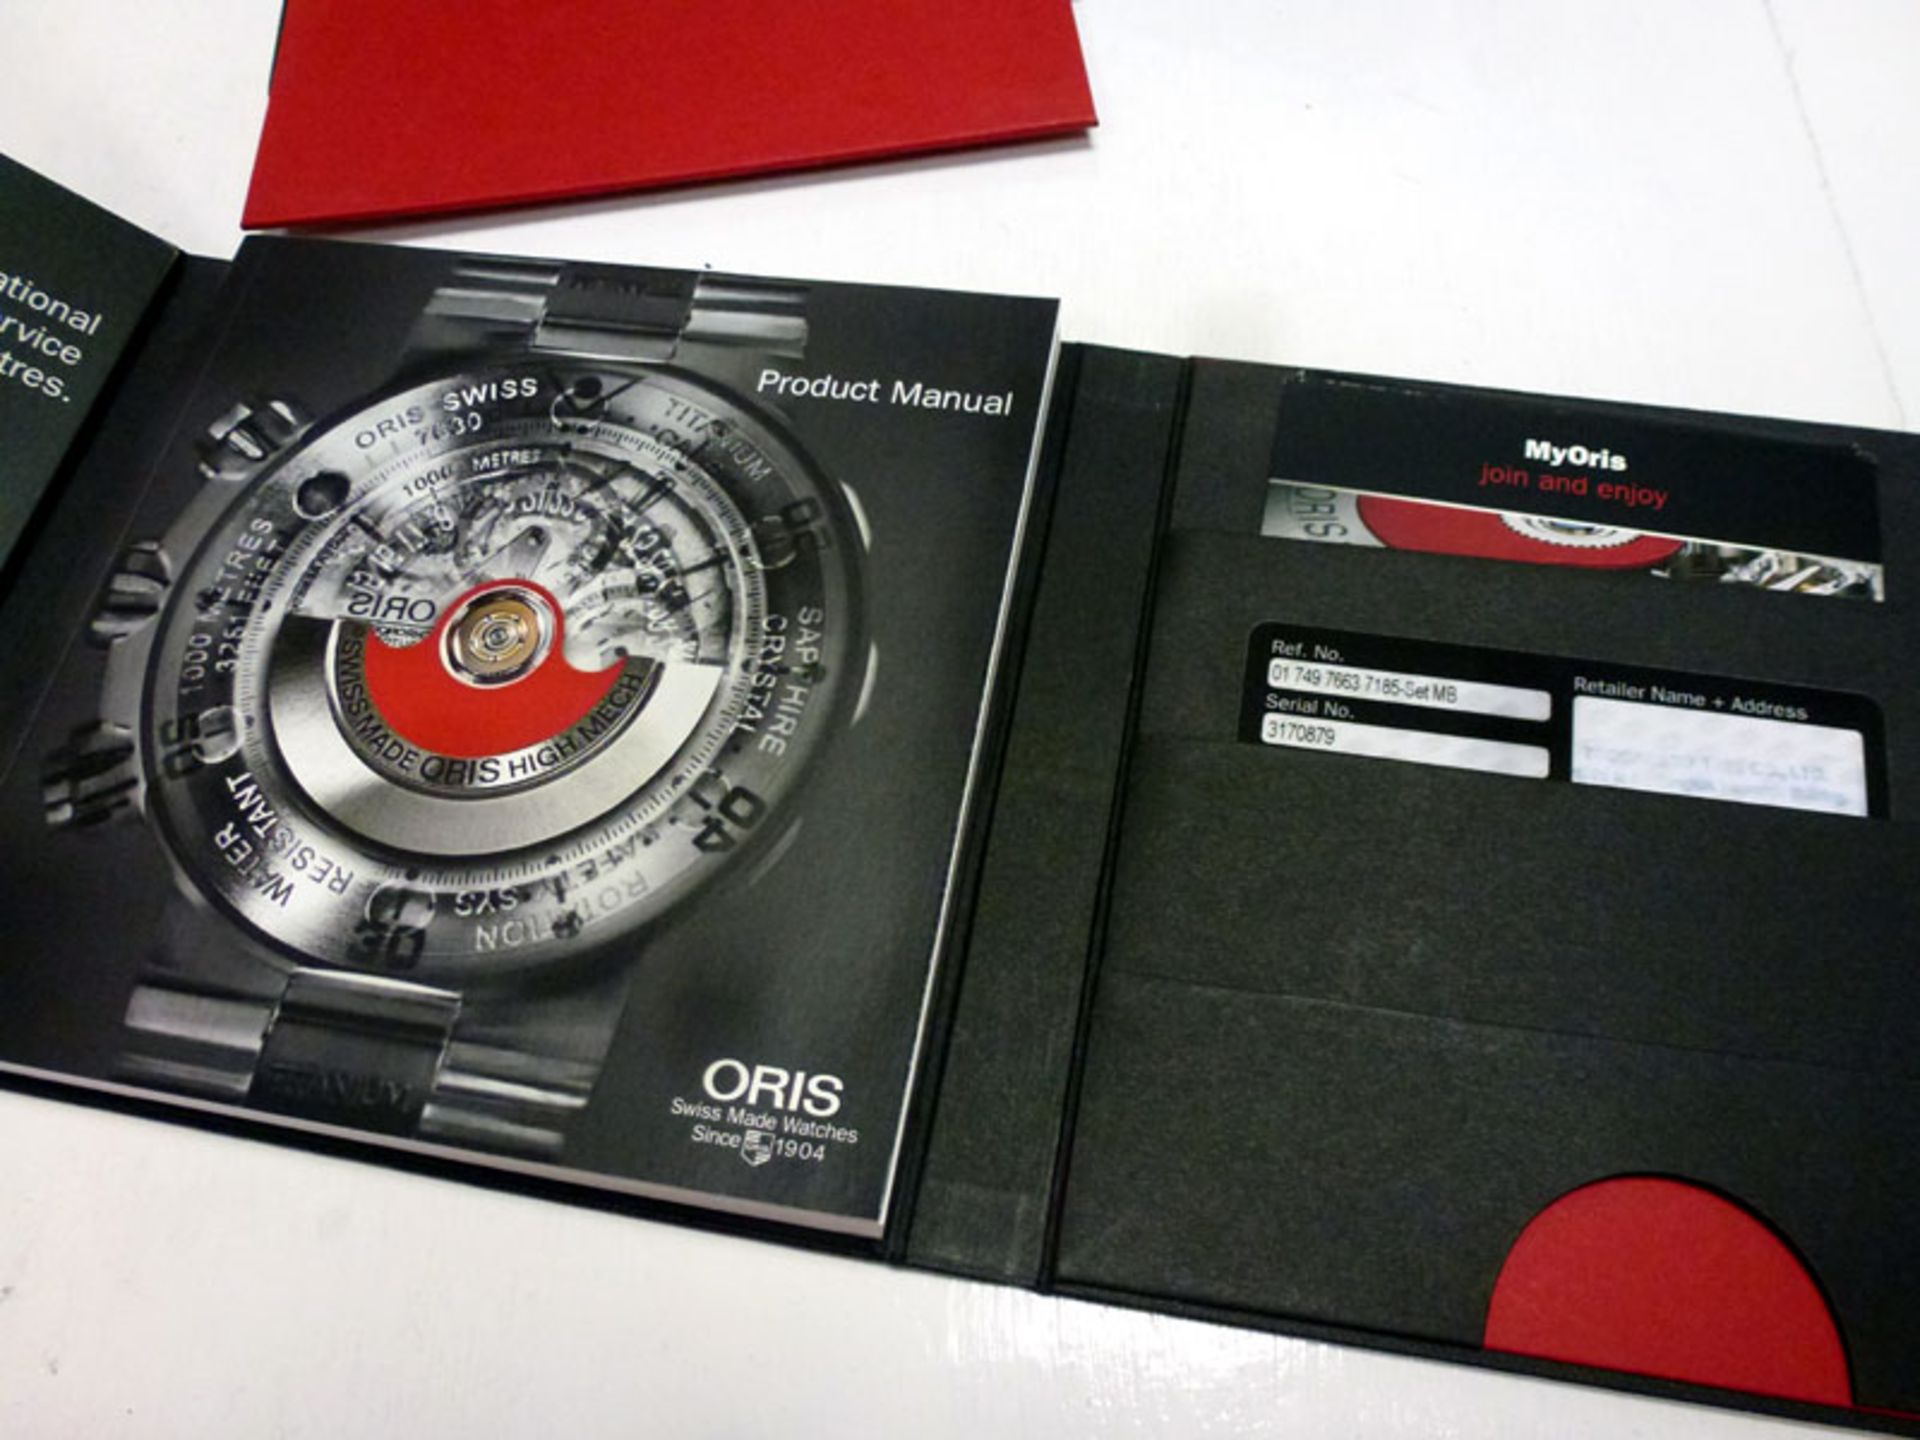 Oris 749 calibre automatic movement with bi-directional red rotor, 38-hour power reserve, date - Image 5 of 7